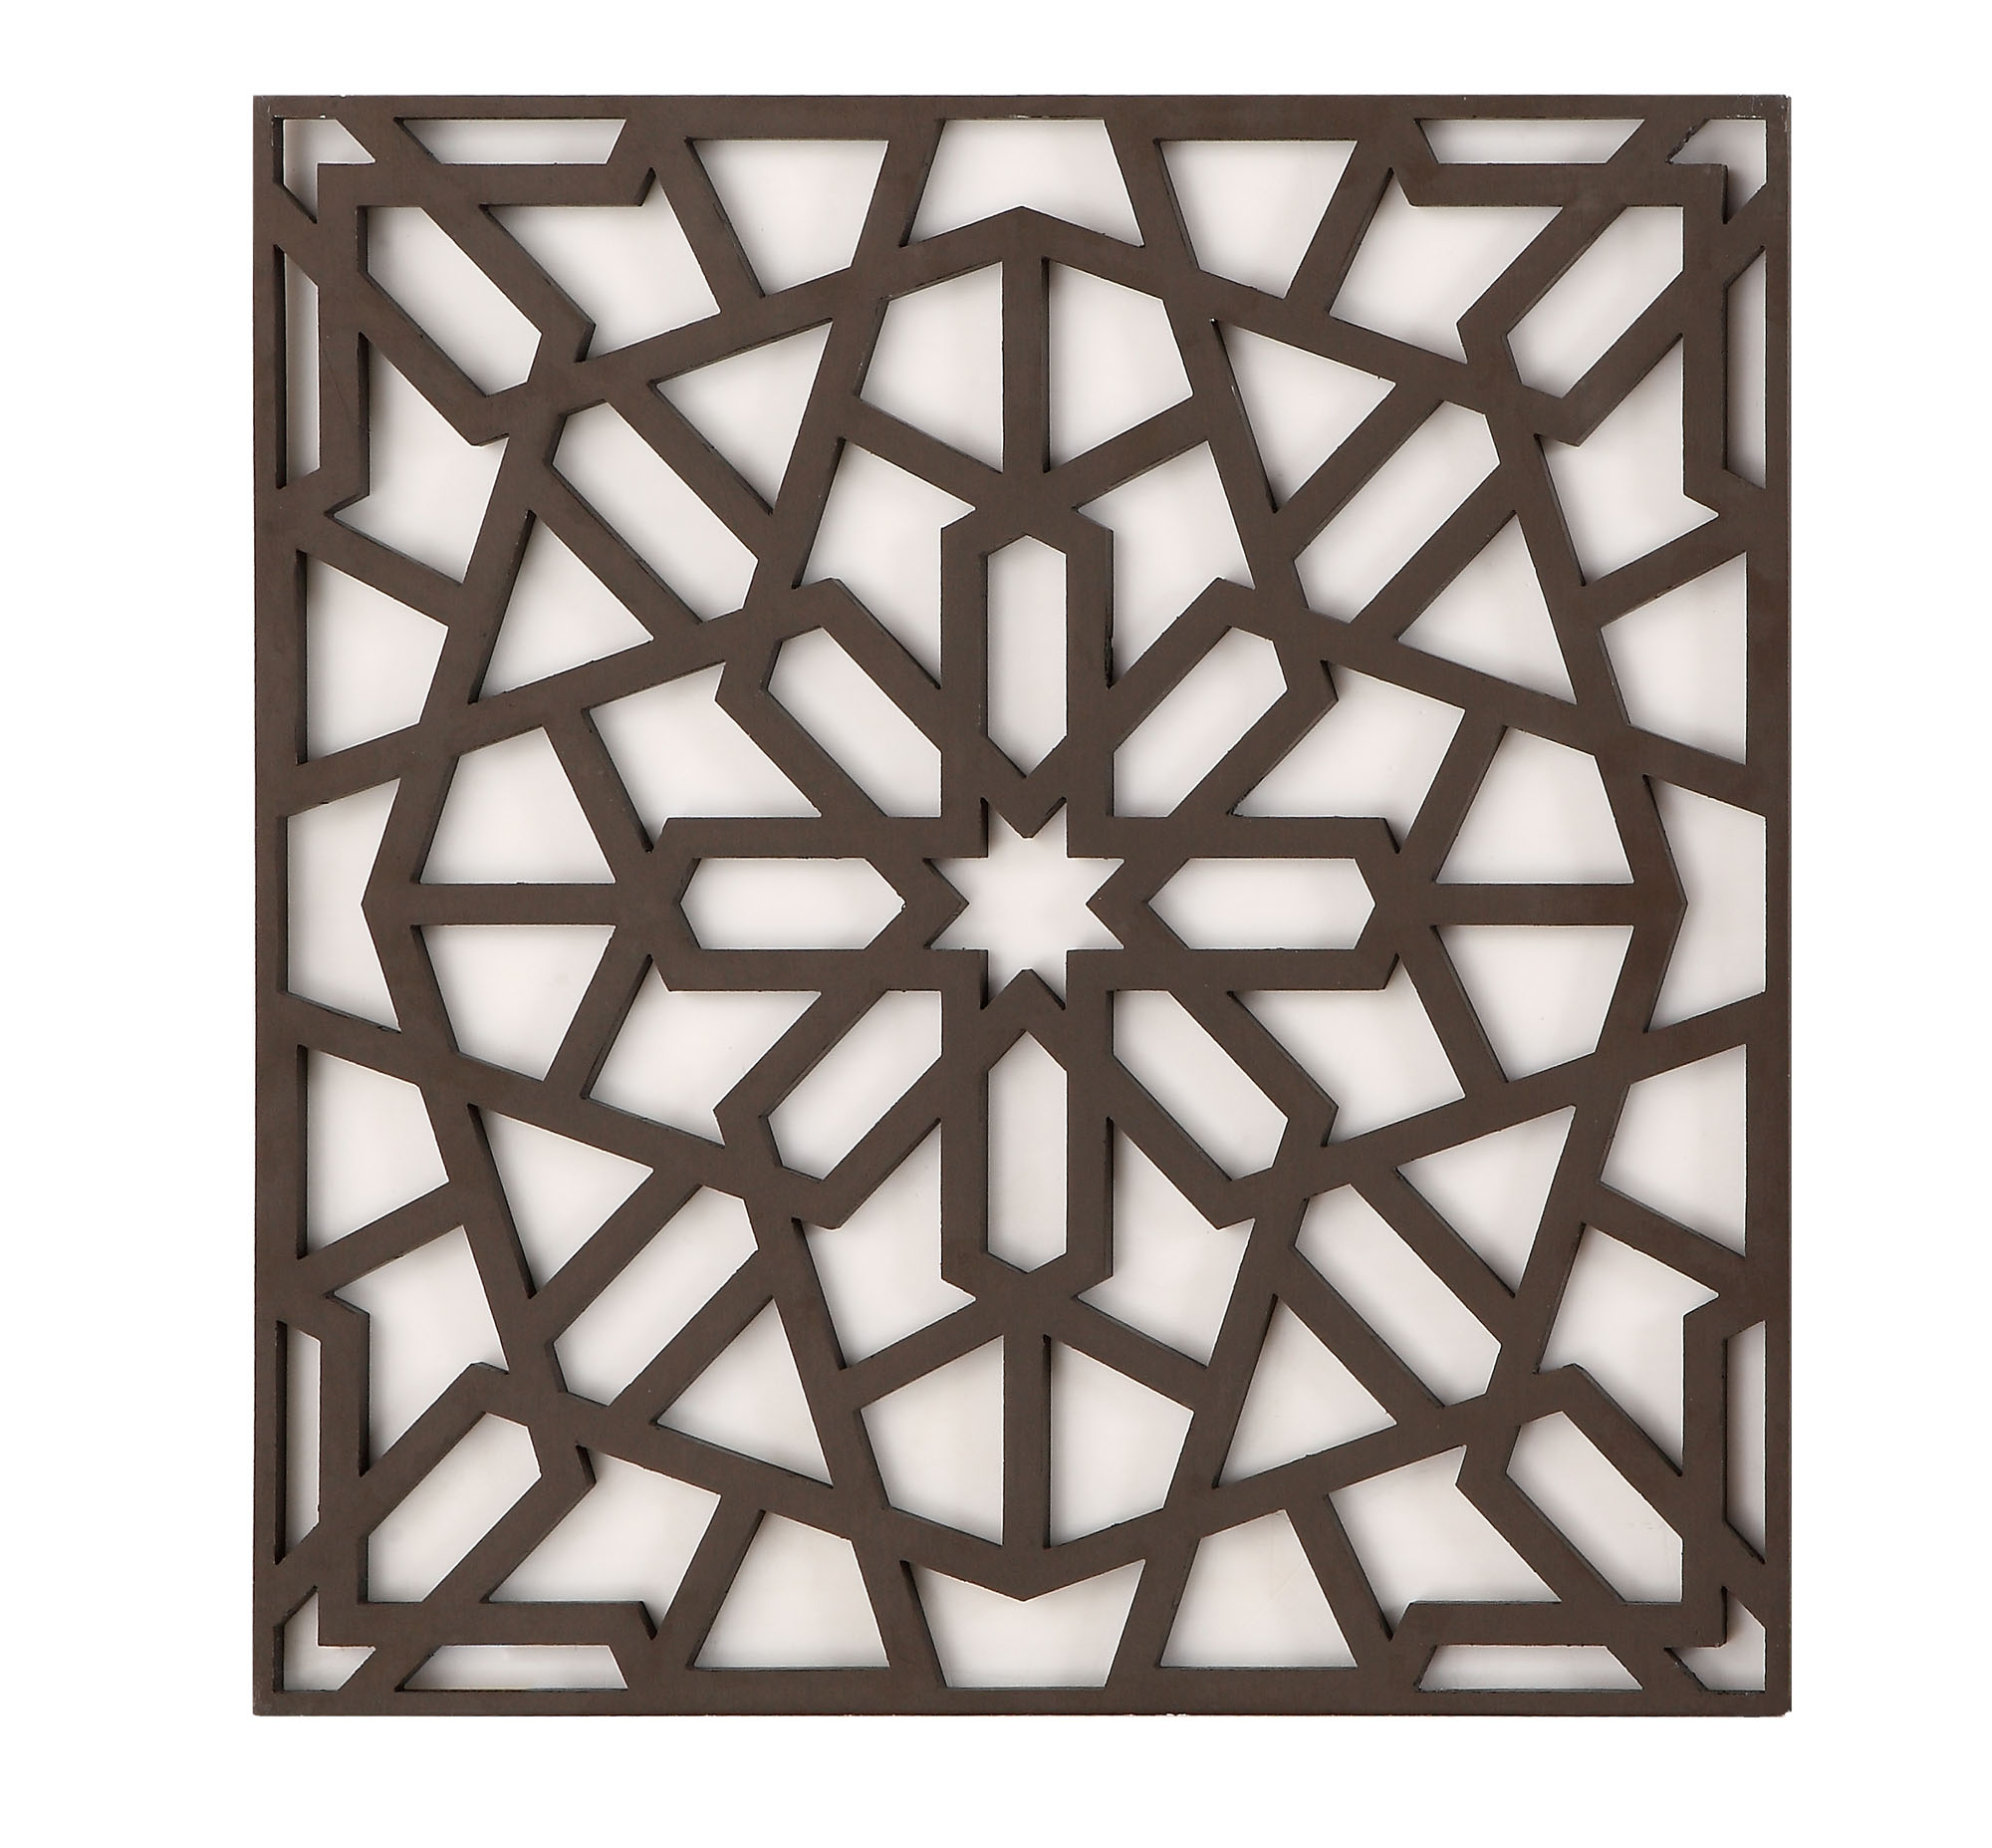 Decorative flower-shaped aluminum alloy carved plate square plate